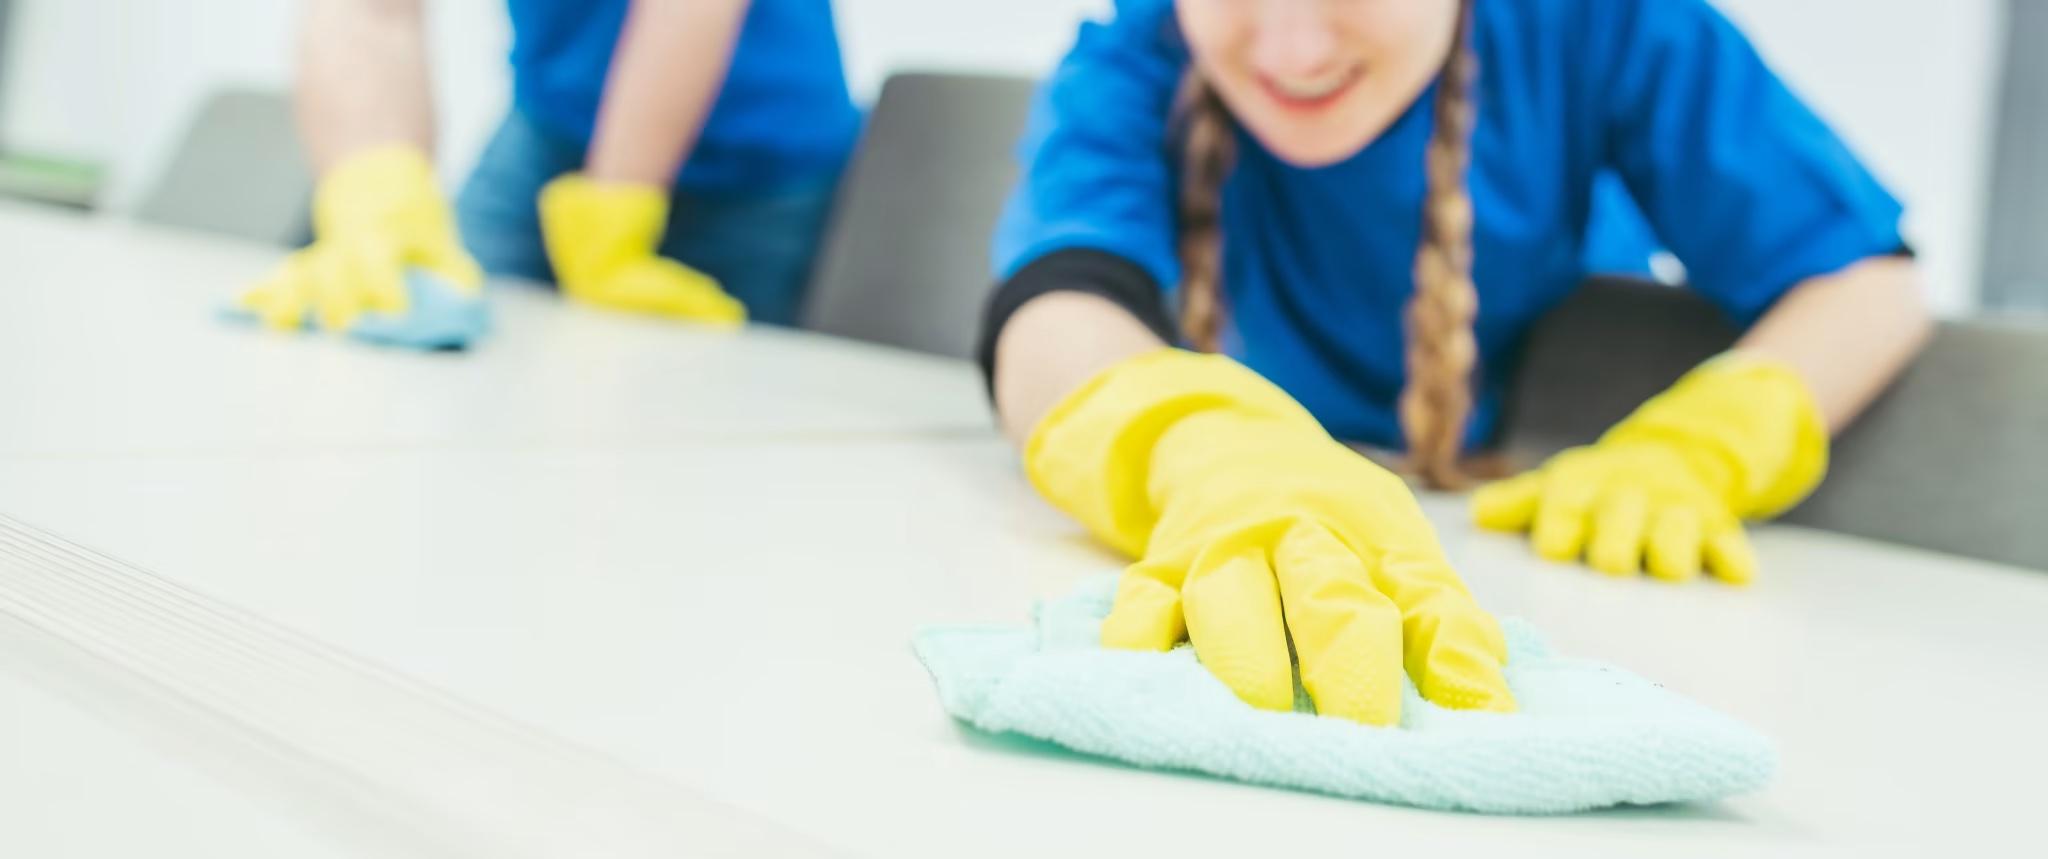 cleaning team member wearing yellow gloves cleaning office table